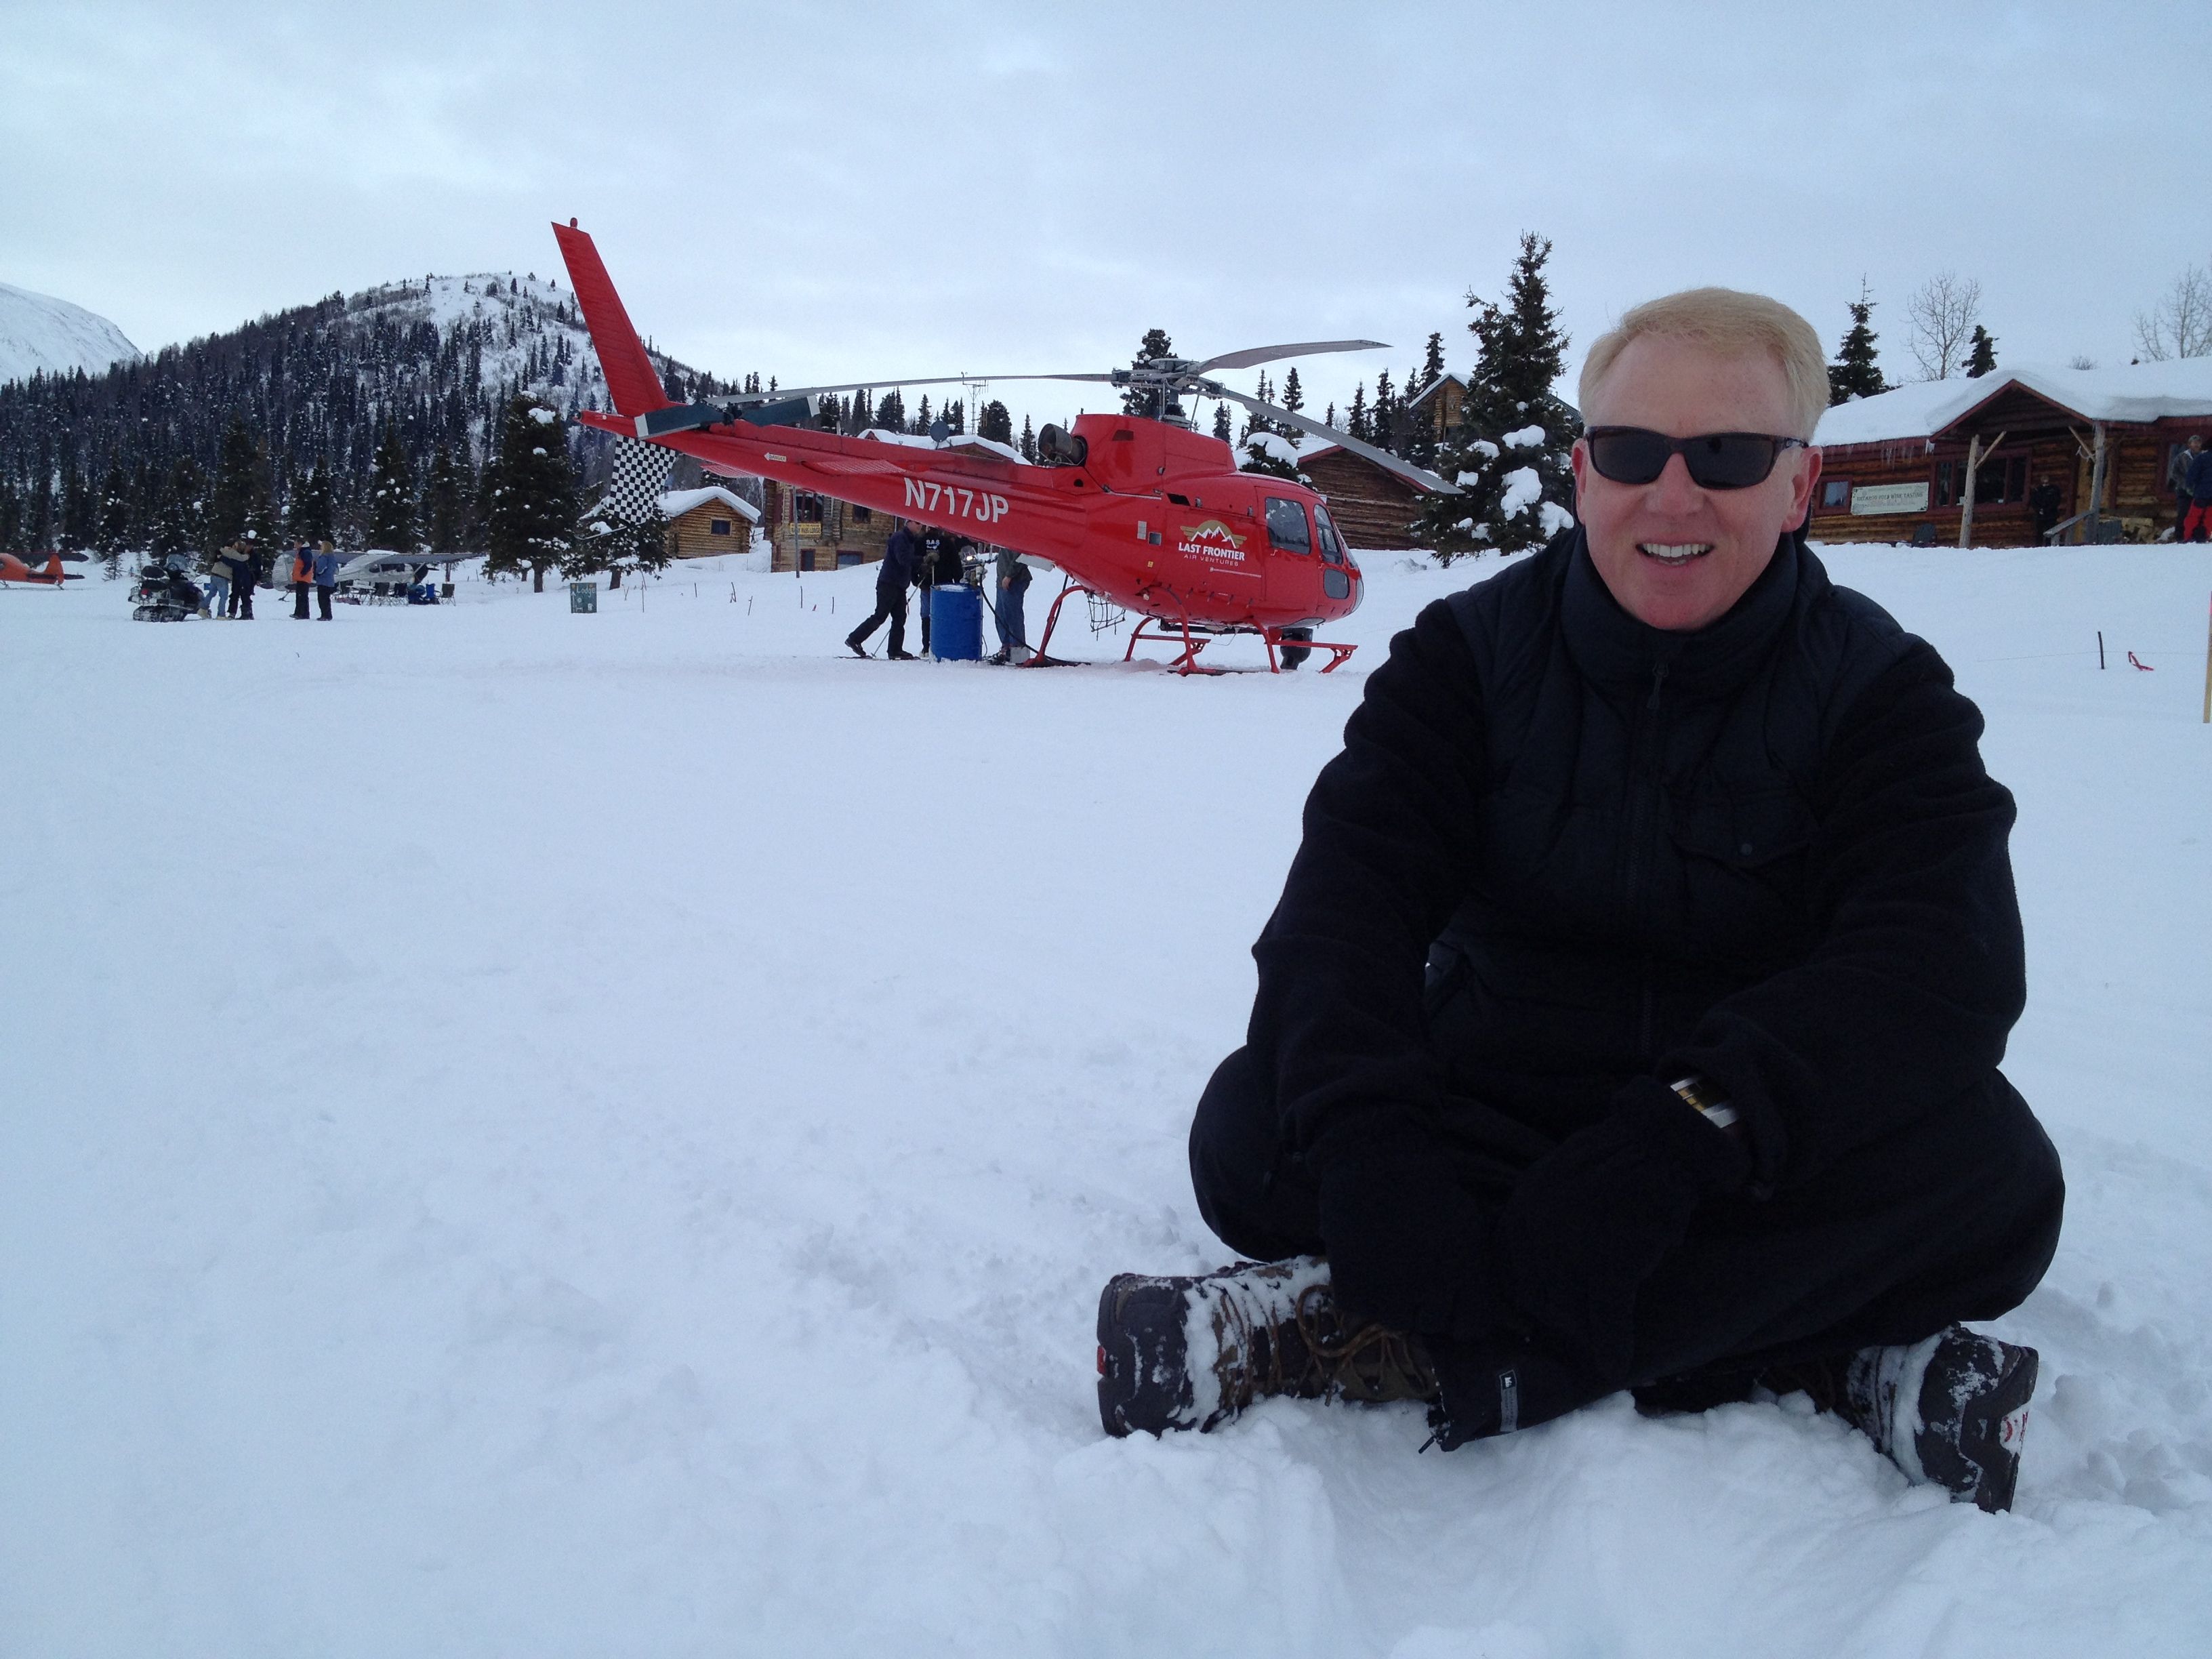 Thomas C. Miller Aerial Cinematographer taking a break while filming the 2013 Alaskan Iditarod Race for the Smithsonian Aerial America 